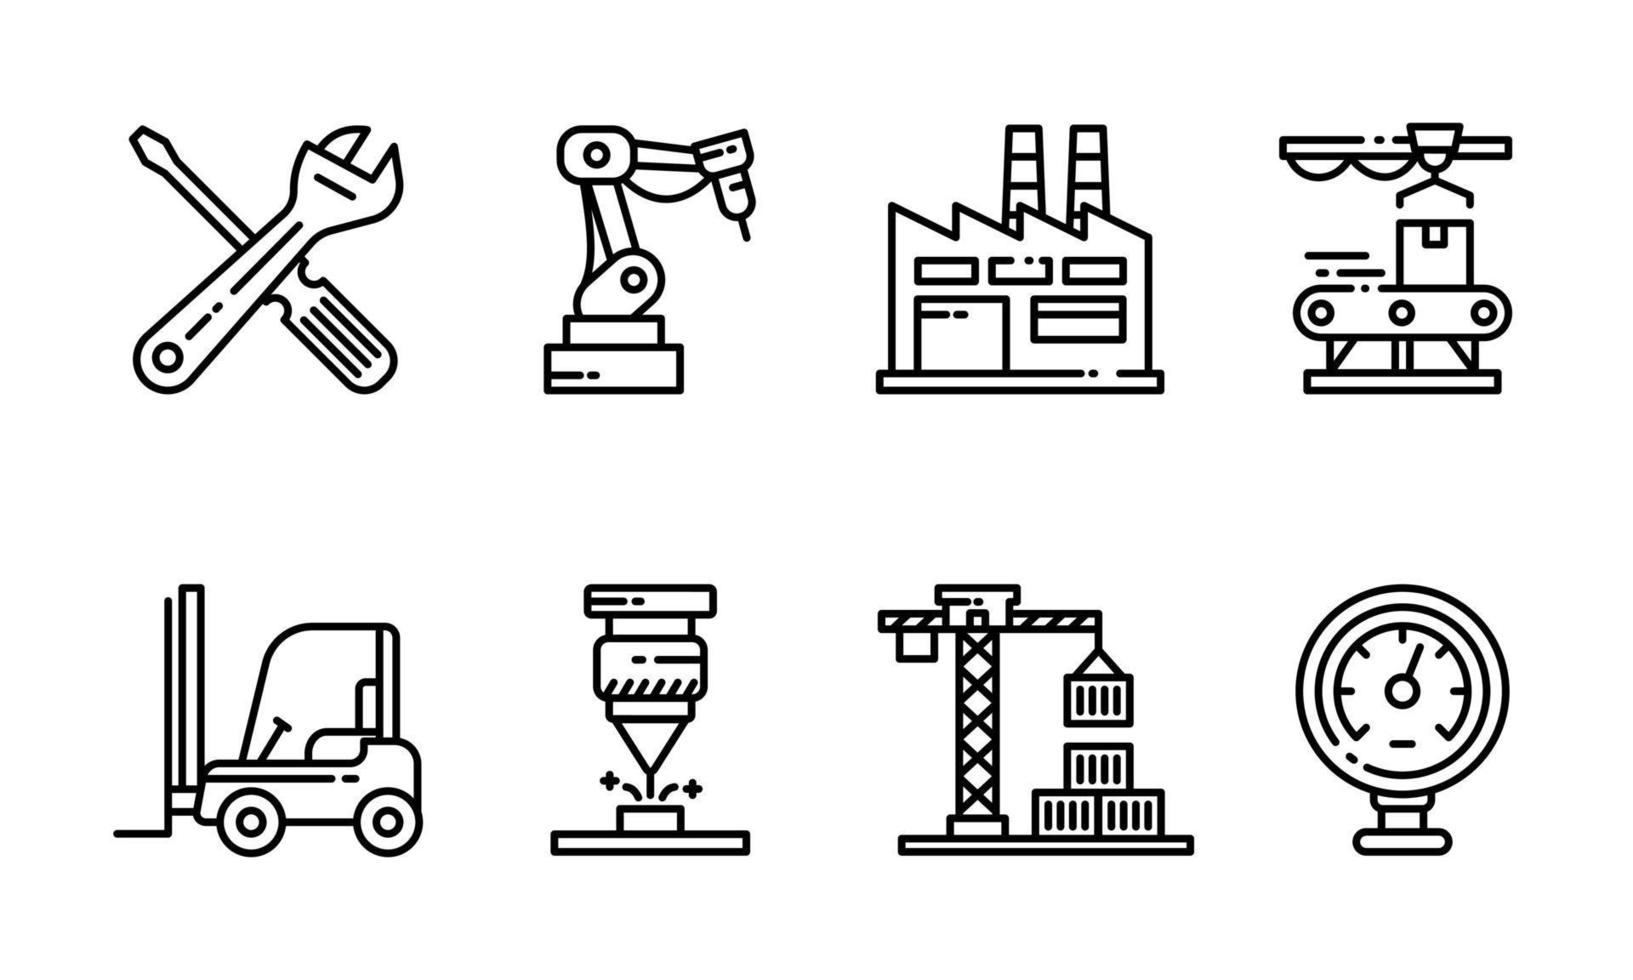 Outlined icon of industrial and manufacturing plan. Vector illustration of engineering and technology industry.